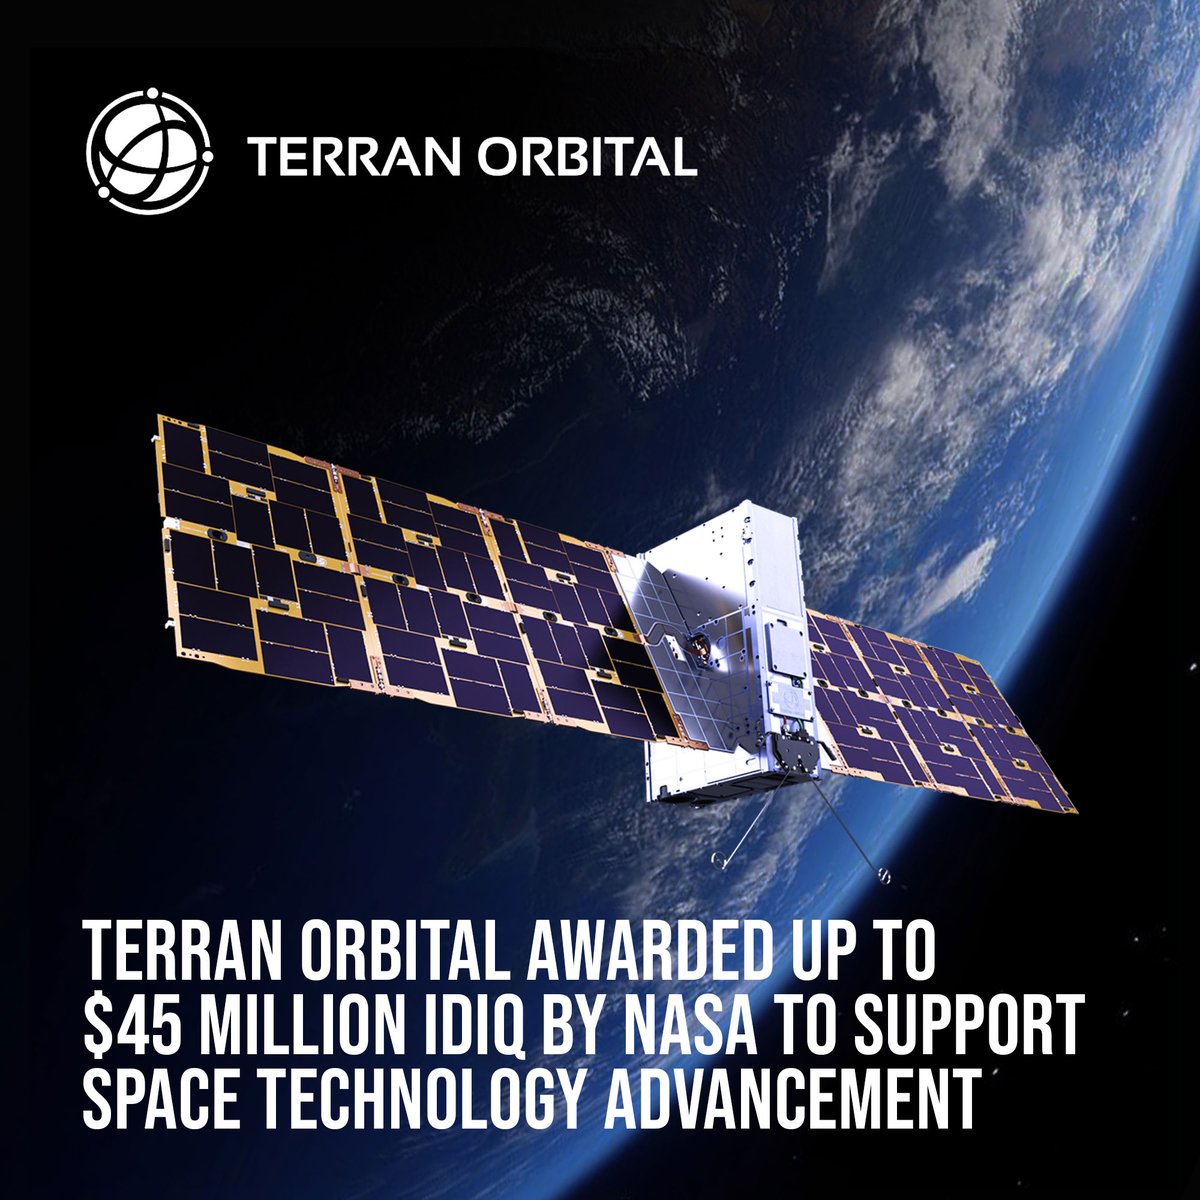 @TerranOrbital announced being awarded an IDIQ contract with a $45 million ceiling value with @NASA ’s Space Technology Mission Directorate. zurl.co/OrBu #TerranOrbital #NASA #IDIQ #Award #Spacecraft